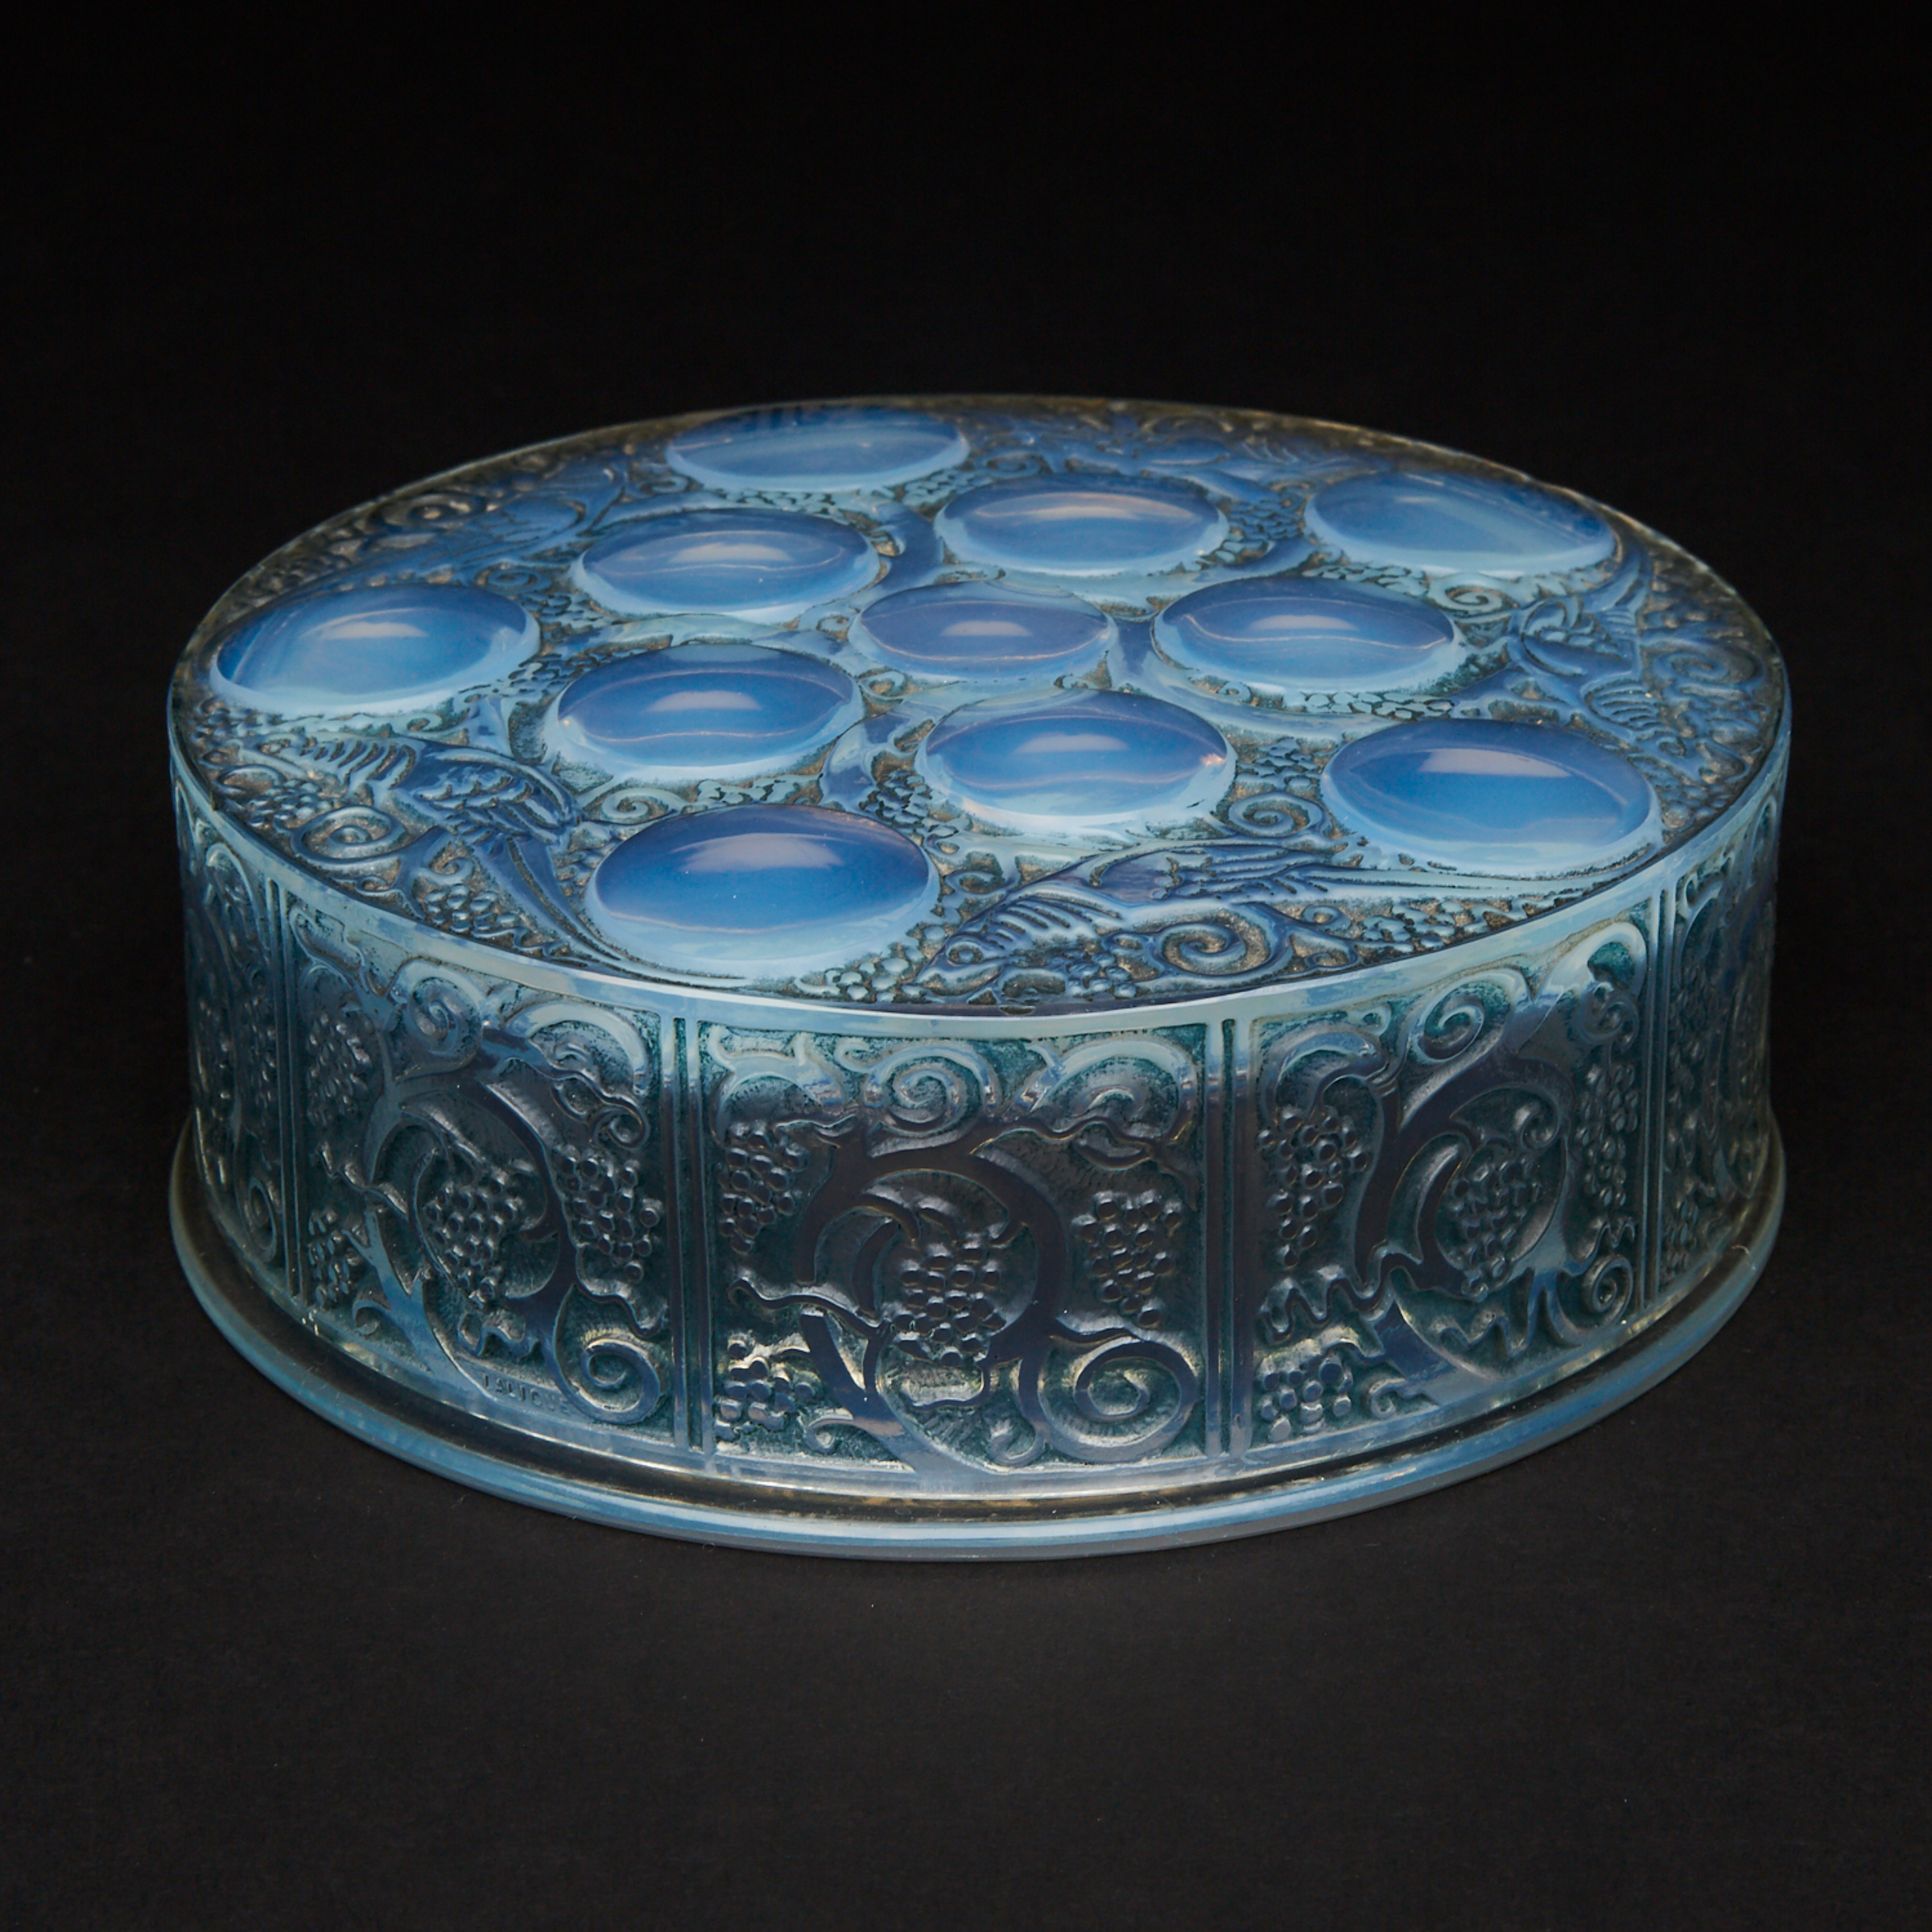 'Roger' or 'Faisons et Cabochons', Lalique Moulded and Enameled Opalescent Glass Circular Box, c.1930